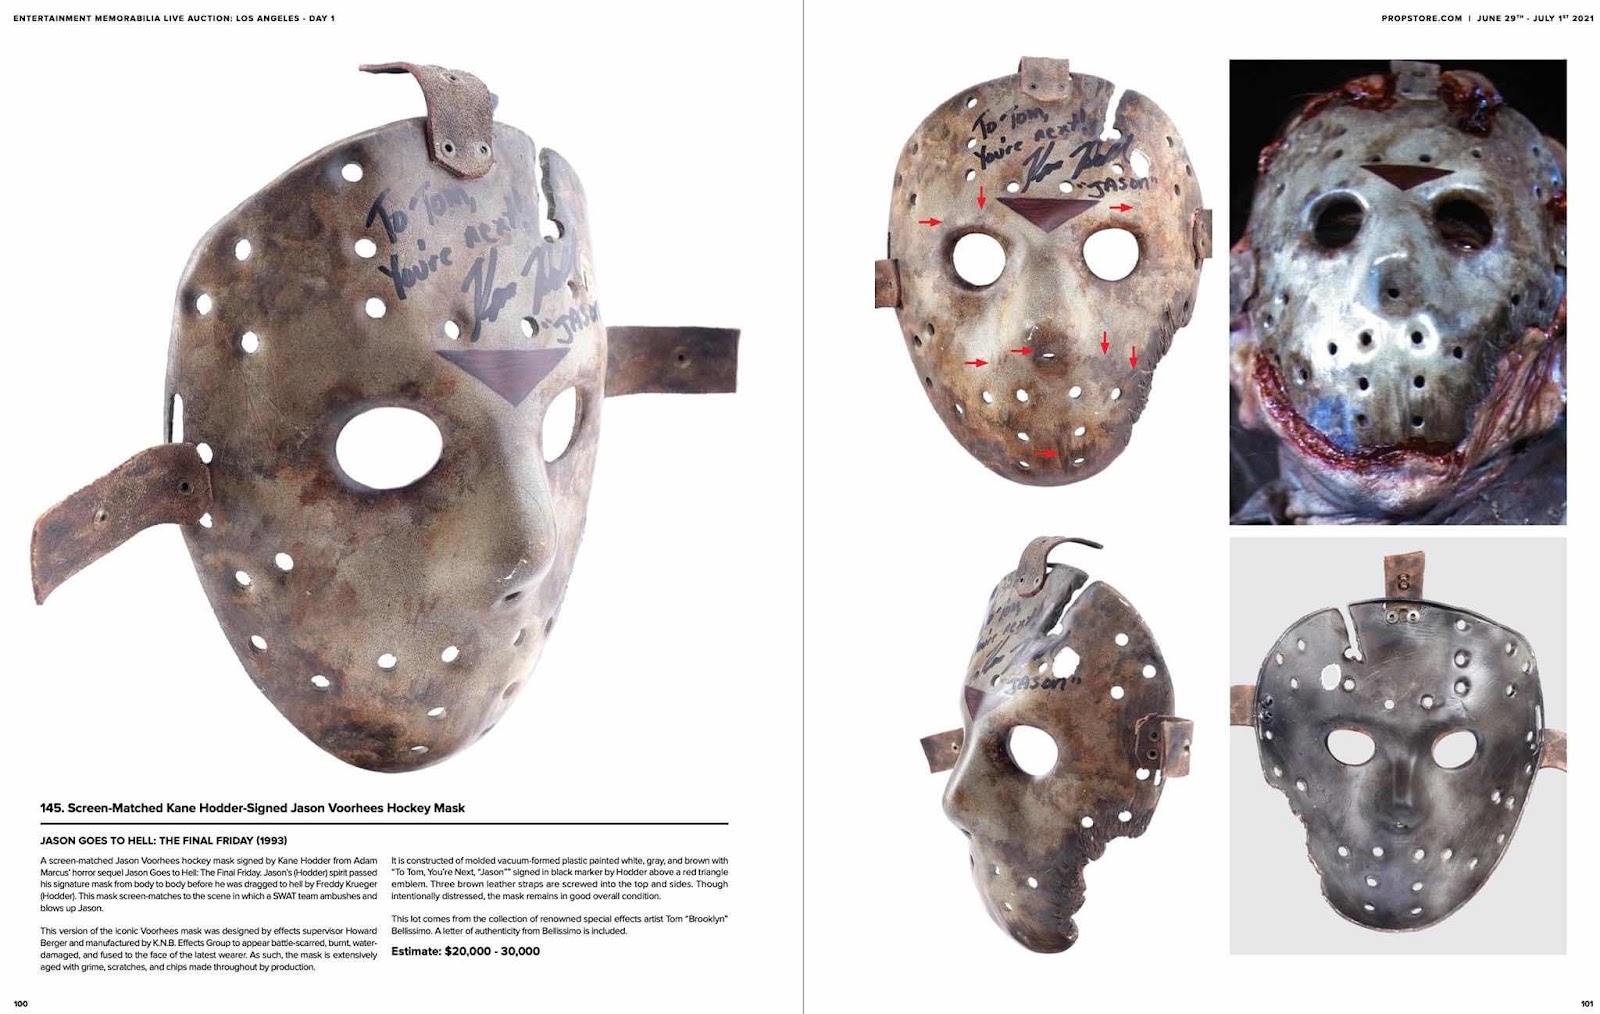 Production Used Jason Goes To Hell Mask And Machete Auctioned Soon